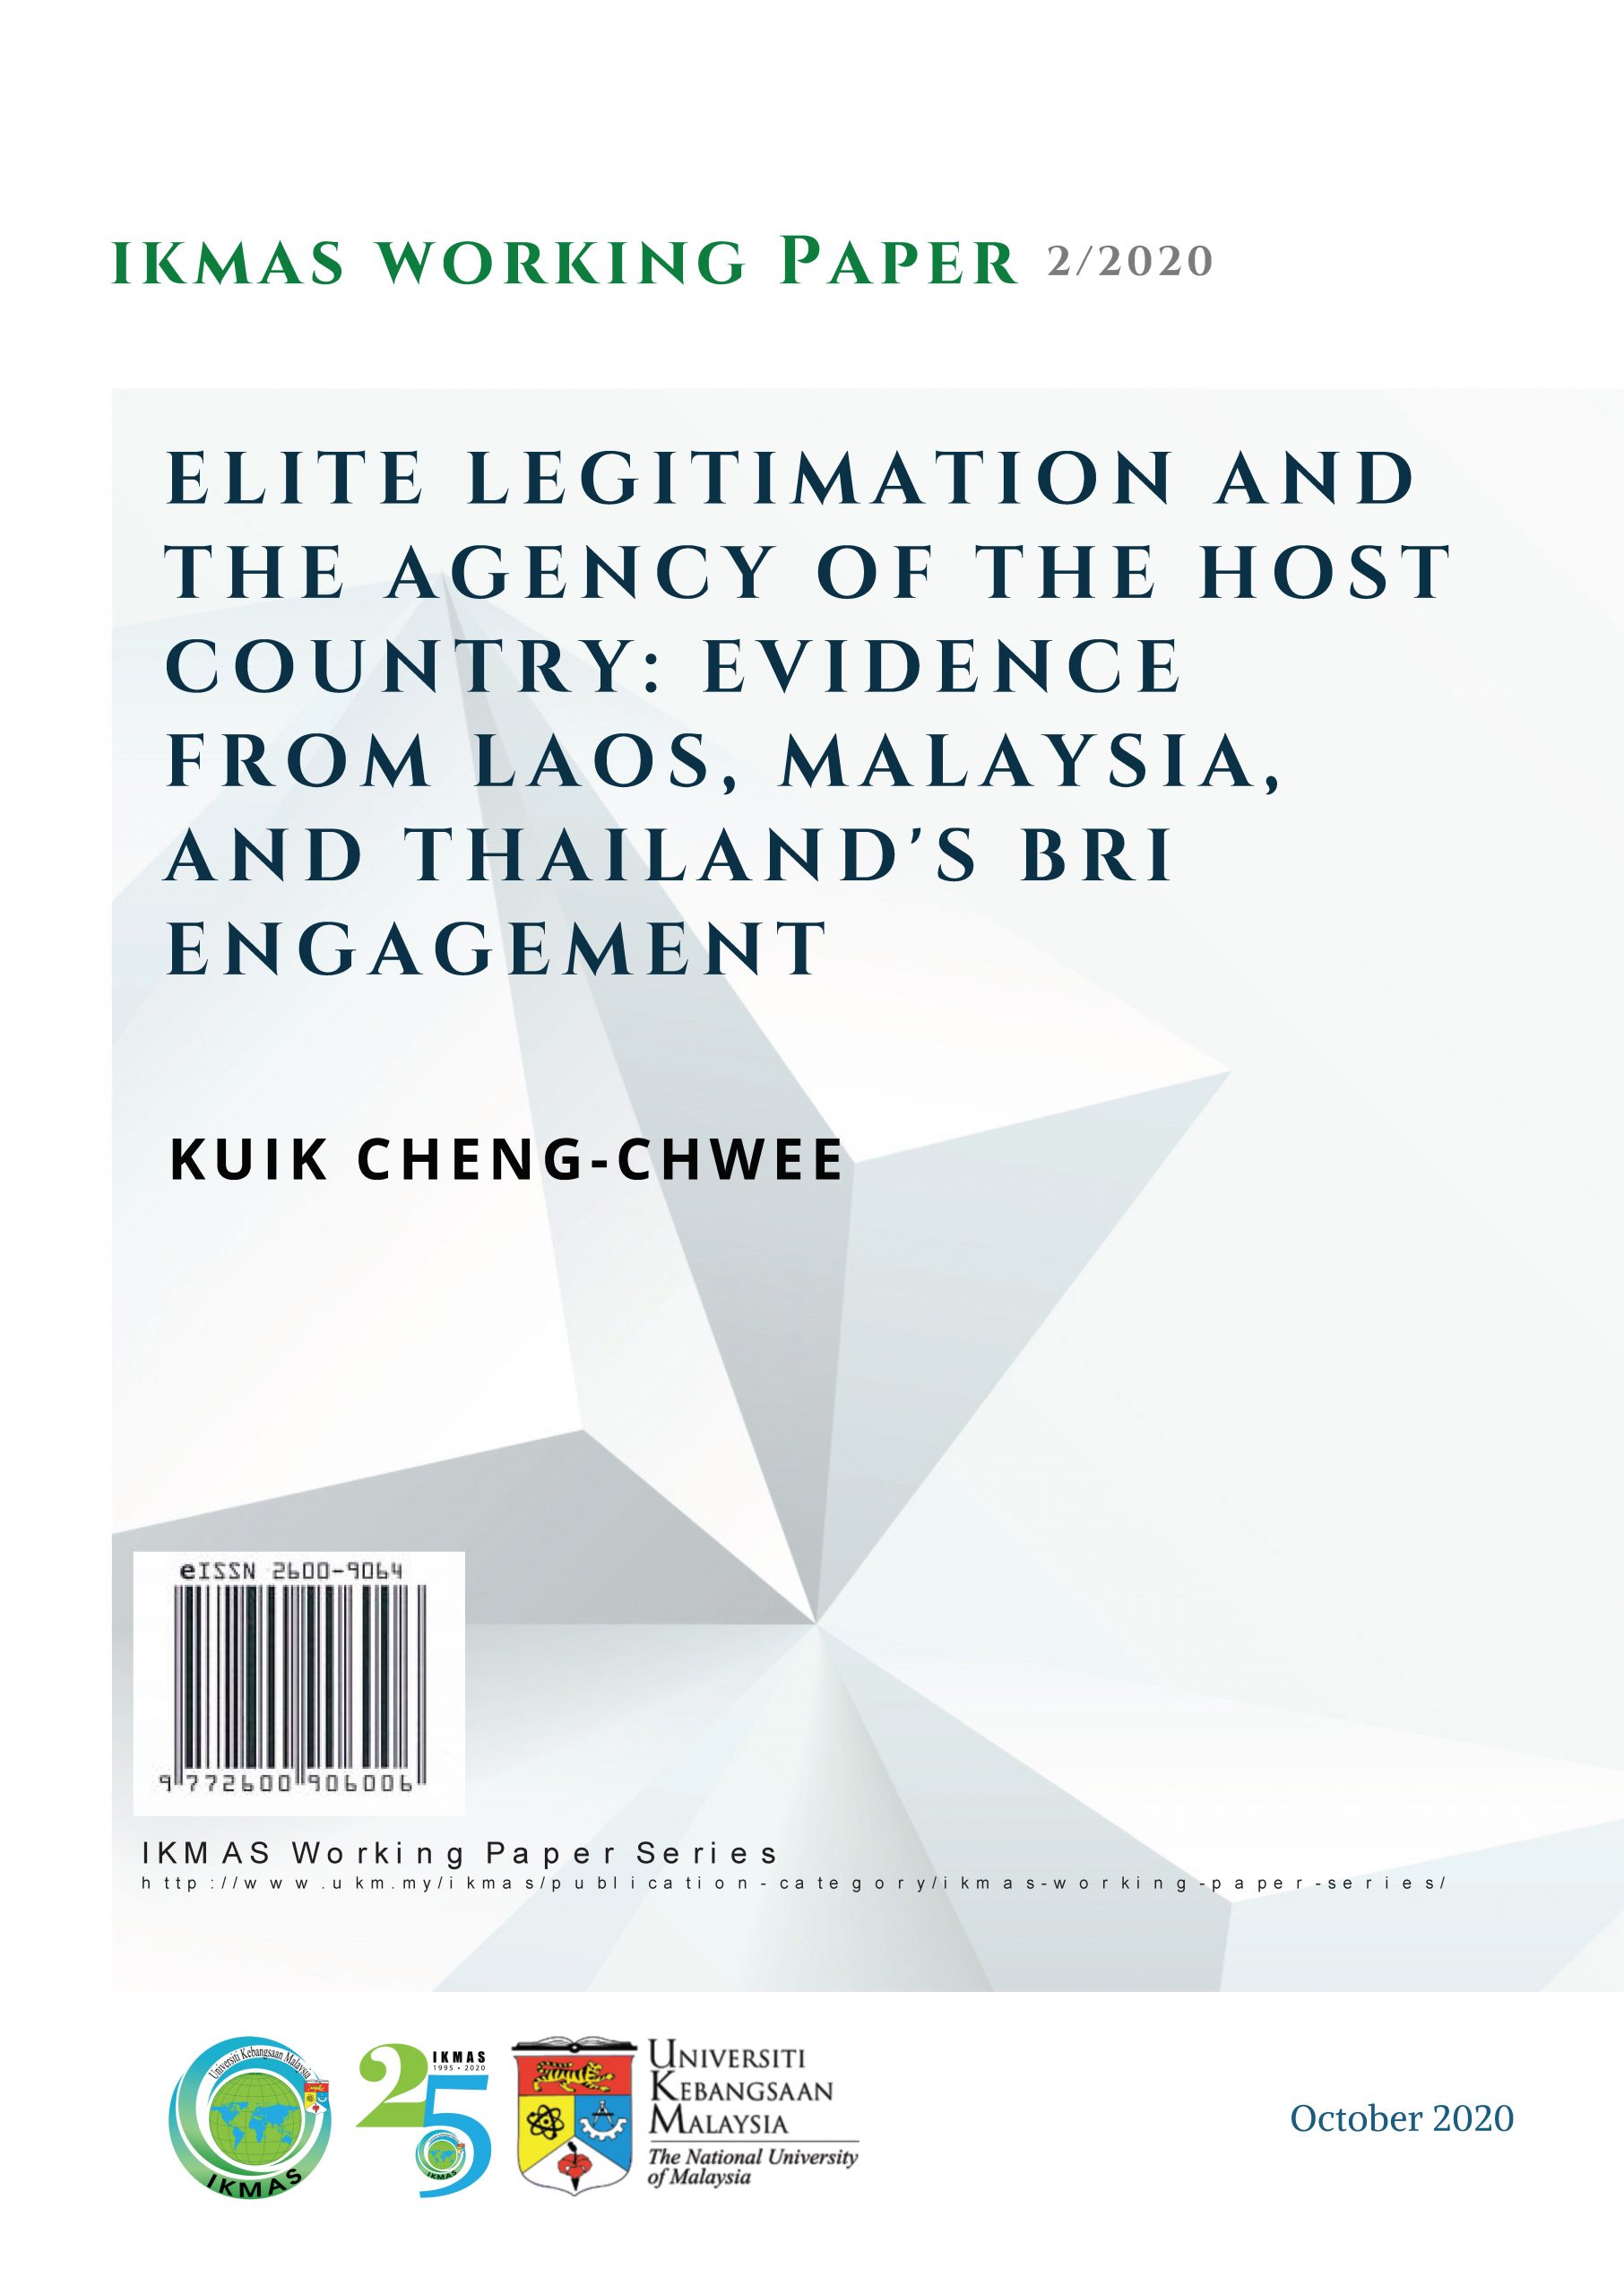 Elite Legitimation and the Agency of the Host Country: Evidence from Laos, Malaysia, and Thailand’s BRI Engagement